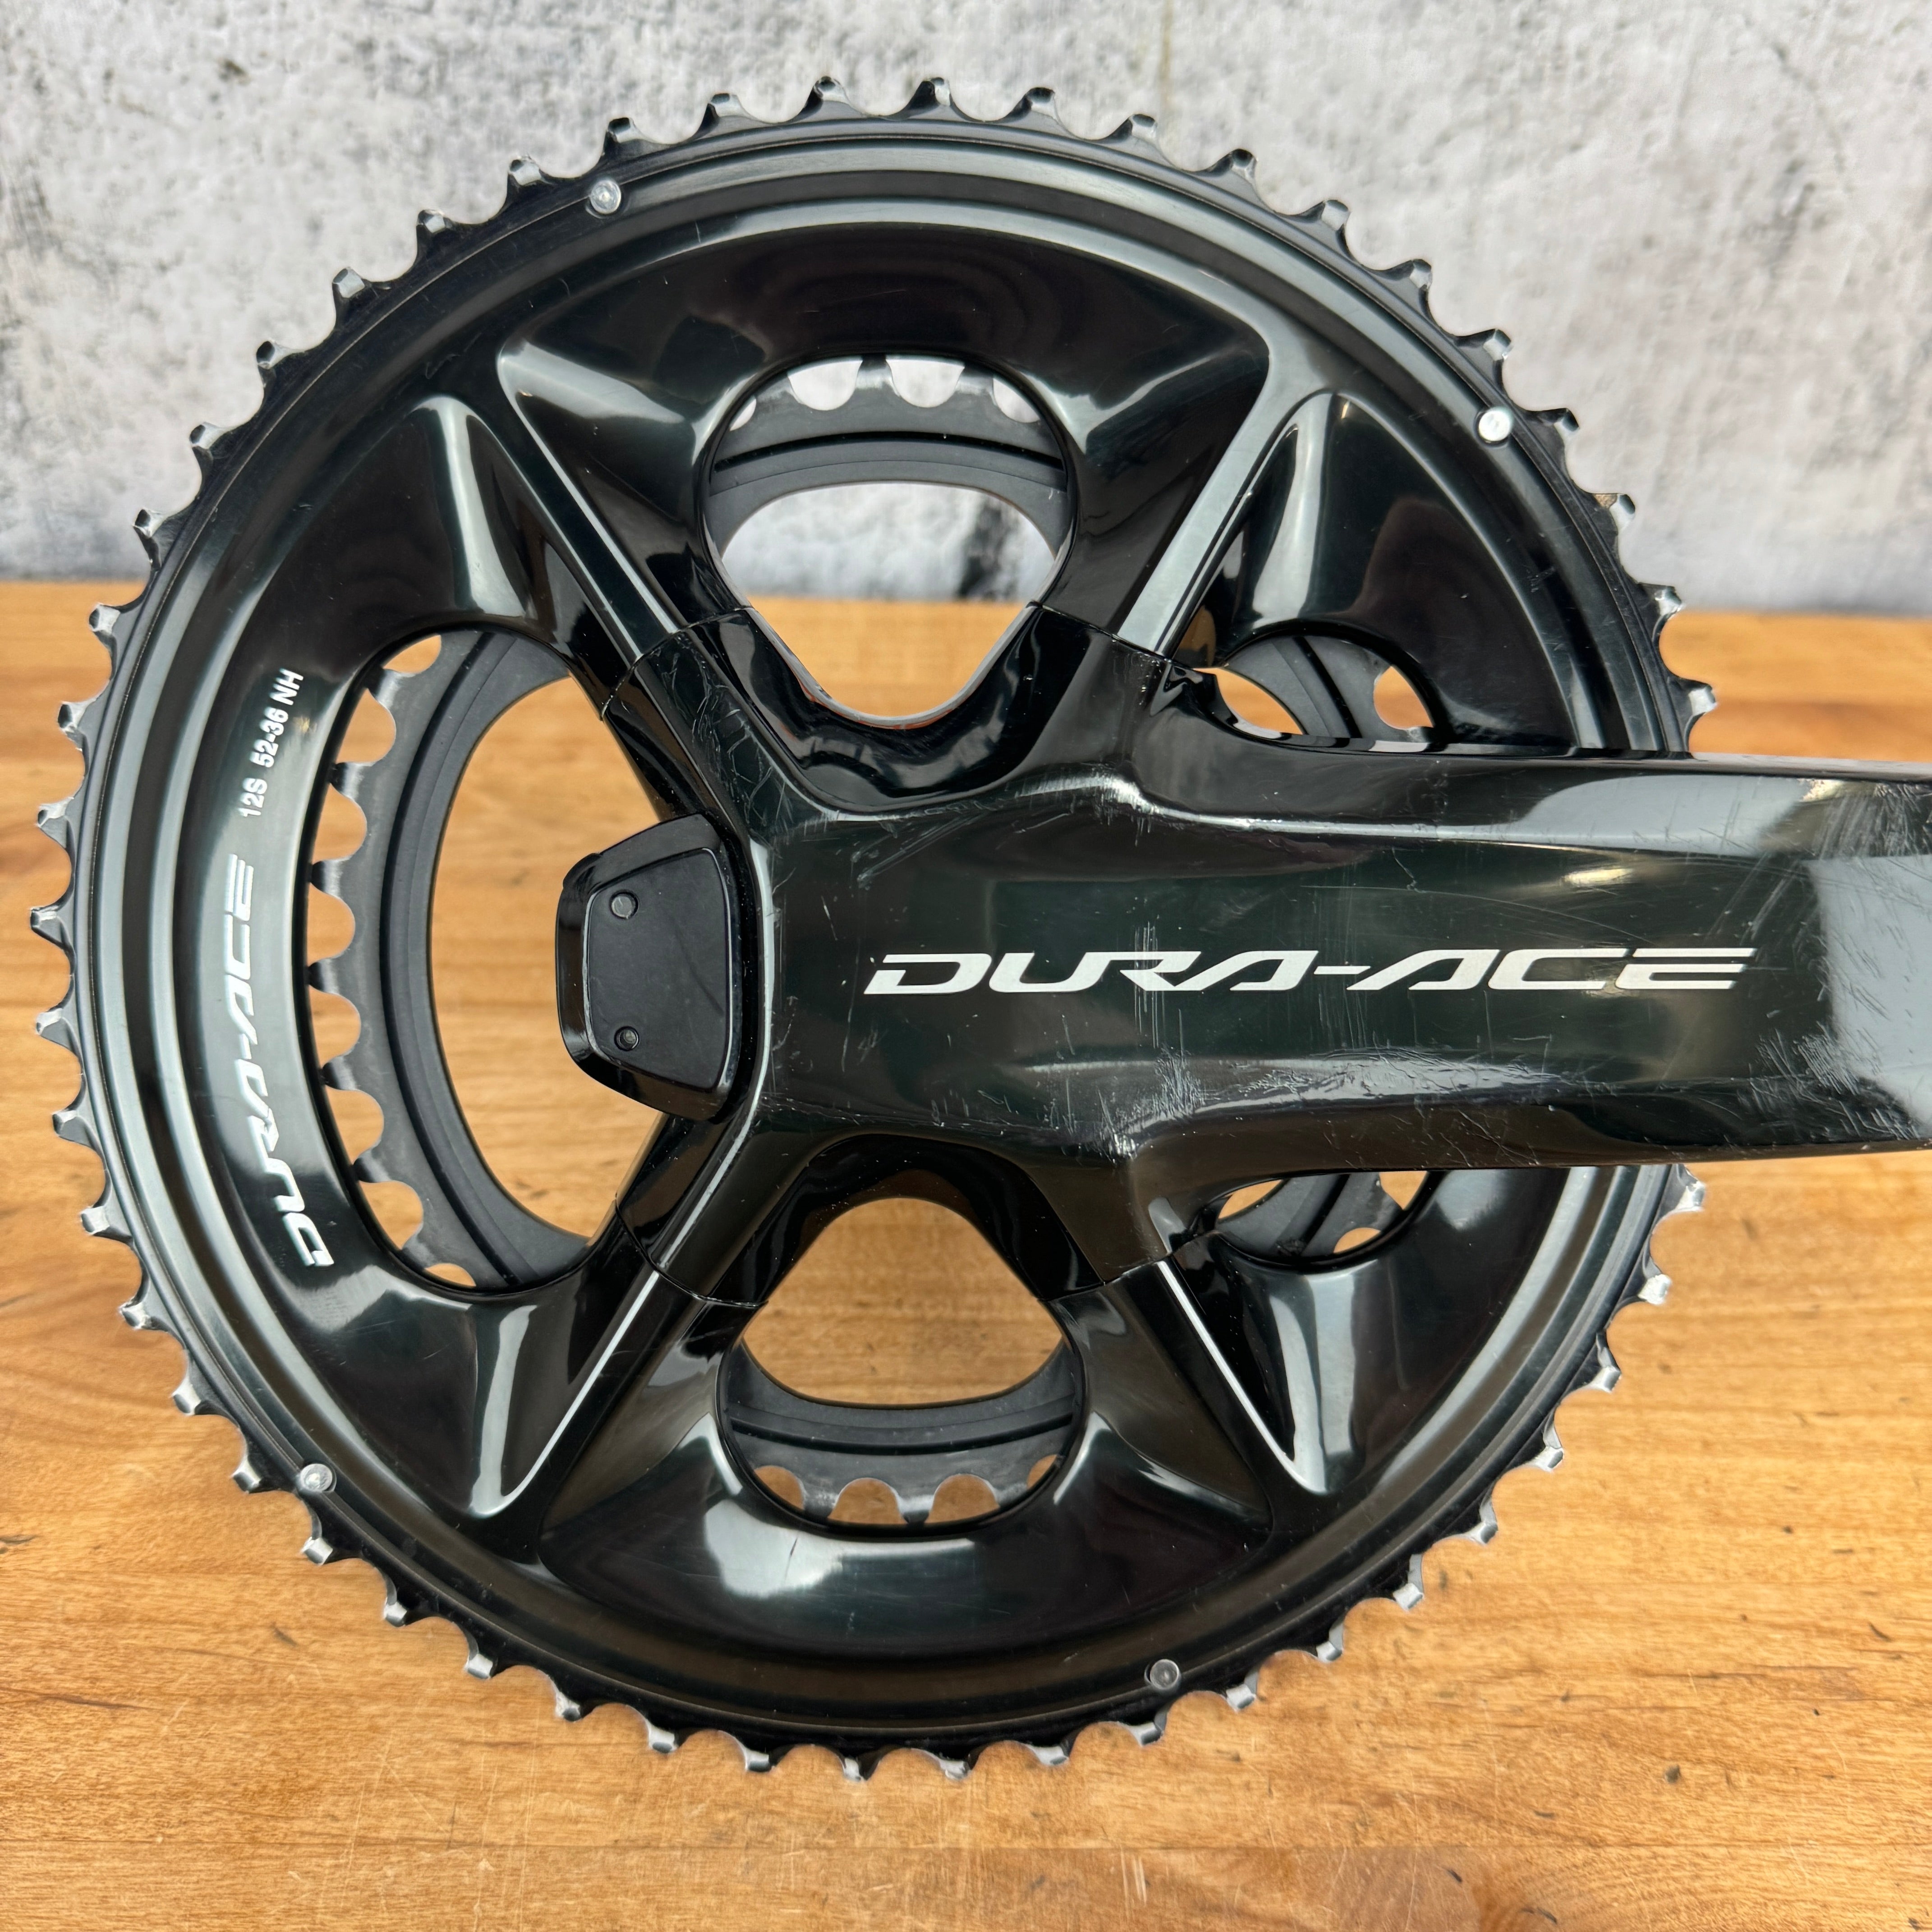 Shimano Dura-Ace FC-R9200-P Power Meter 172.5mm 52/36t 12-Speed